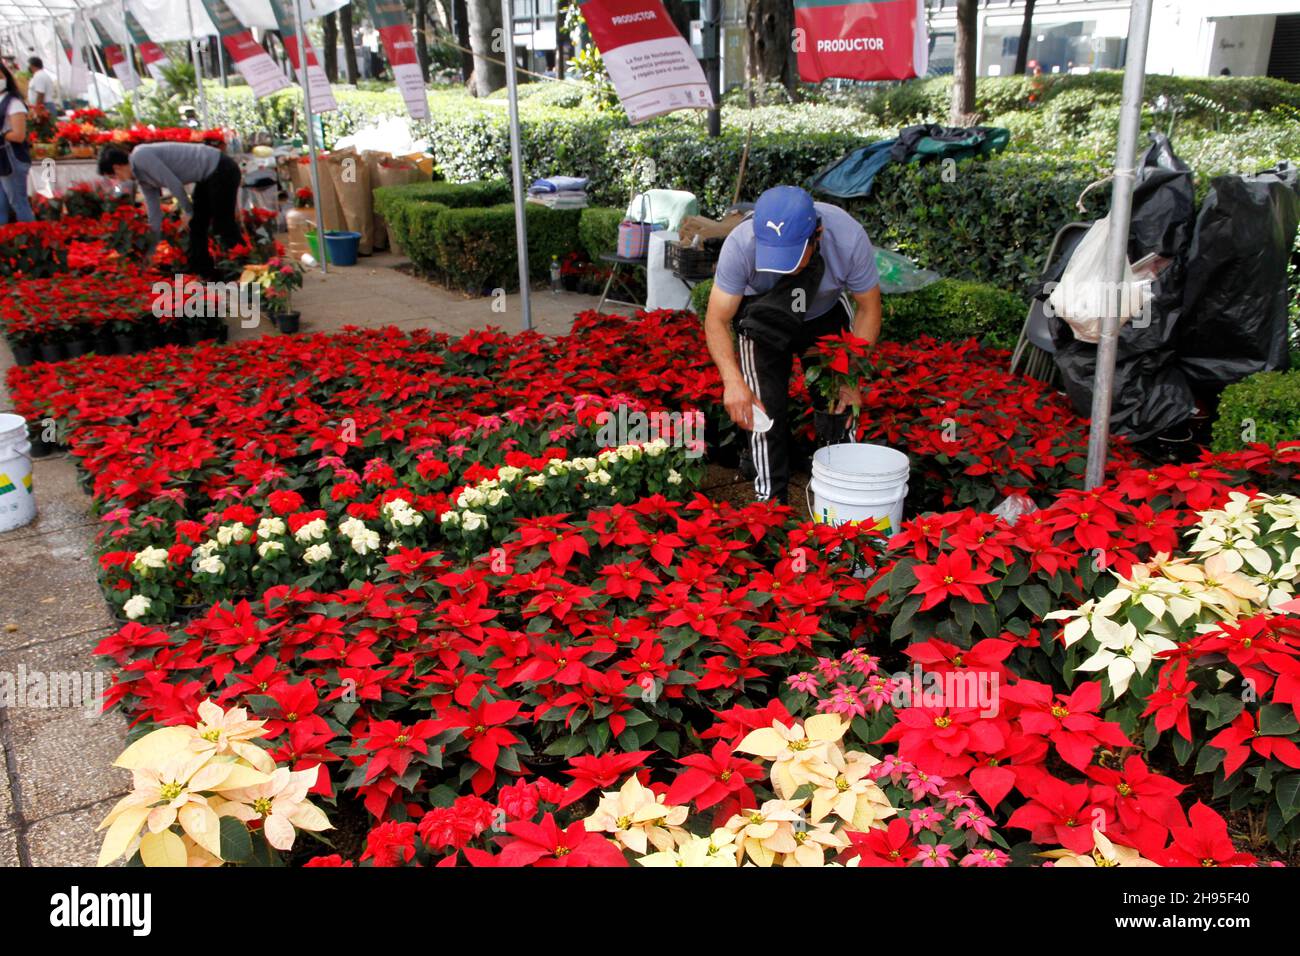 Non Exclusive: MEXICO CITY, MEXICO - DECEMBER 3, 2021: Persons visit stands of Farmers that offer the traditional Christmas Eve Flower in its various Stock Photo